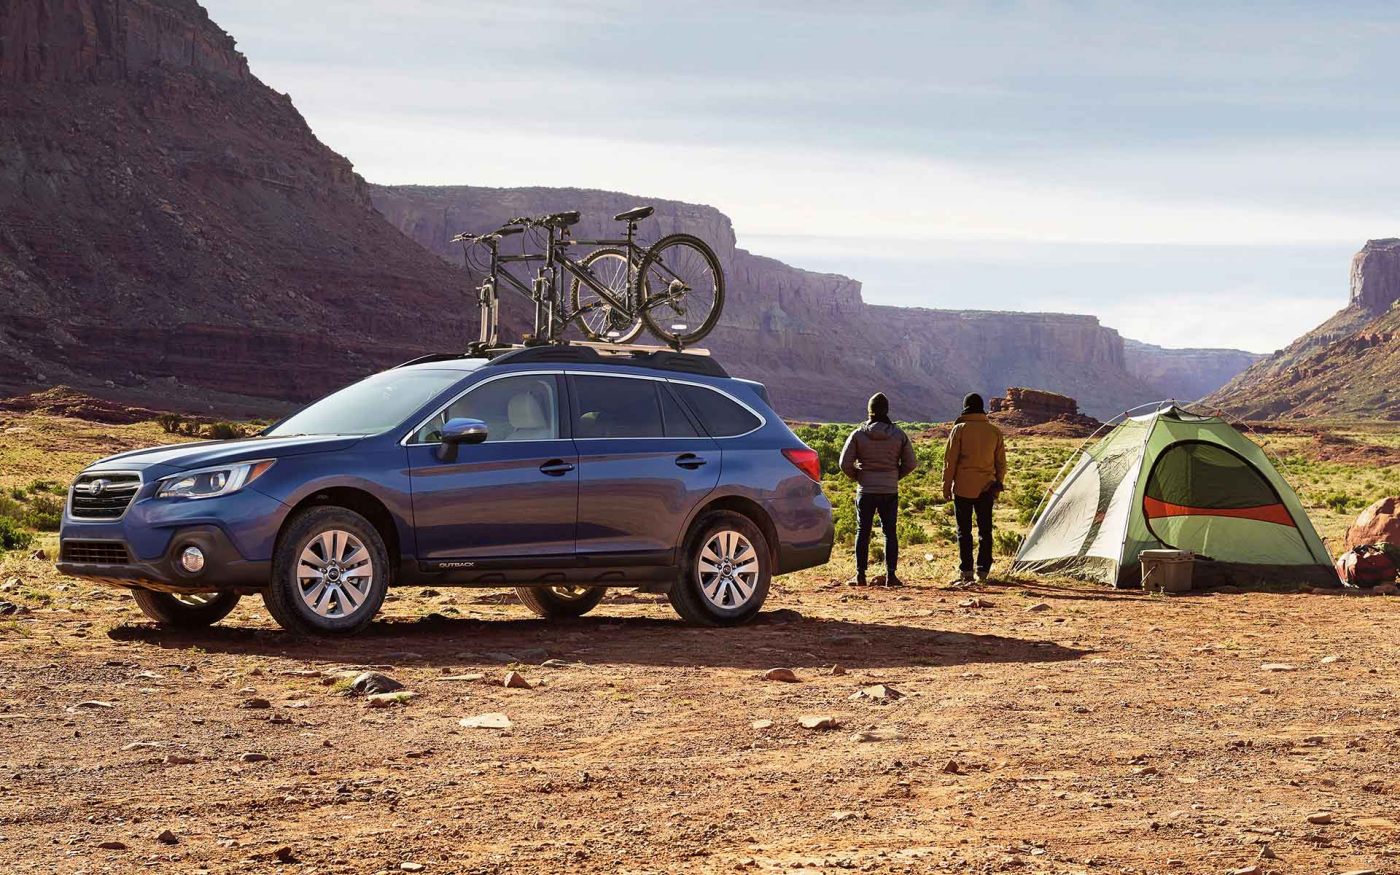 2018 Subaru Outback Longest-Lasting Vehicle in Its Class